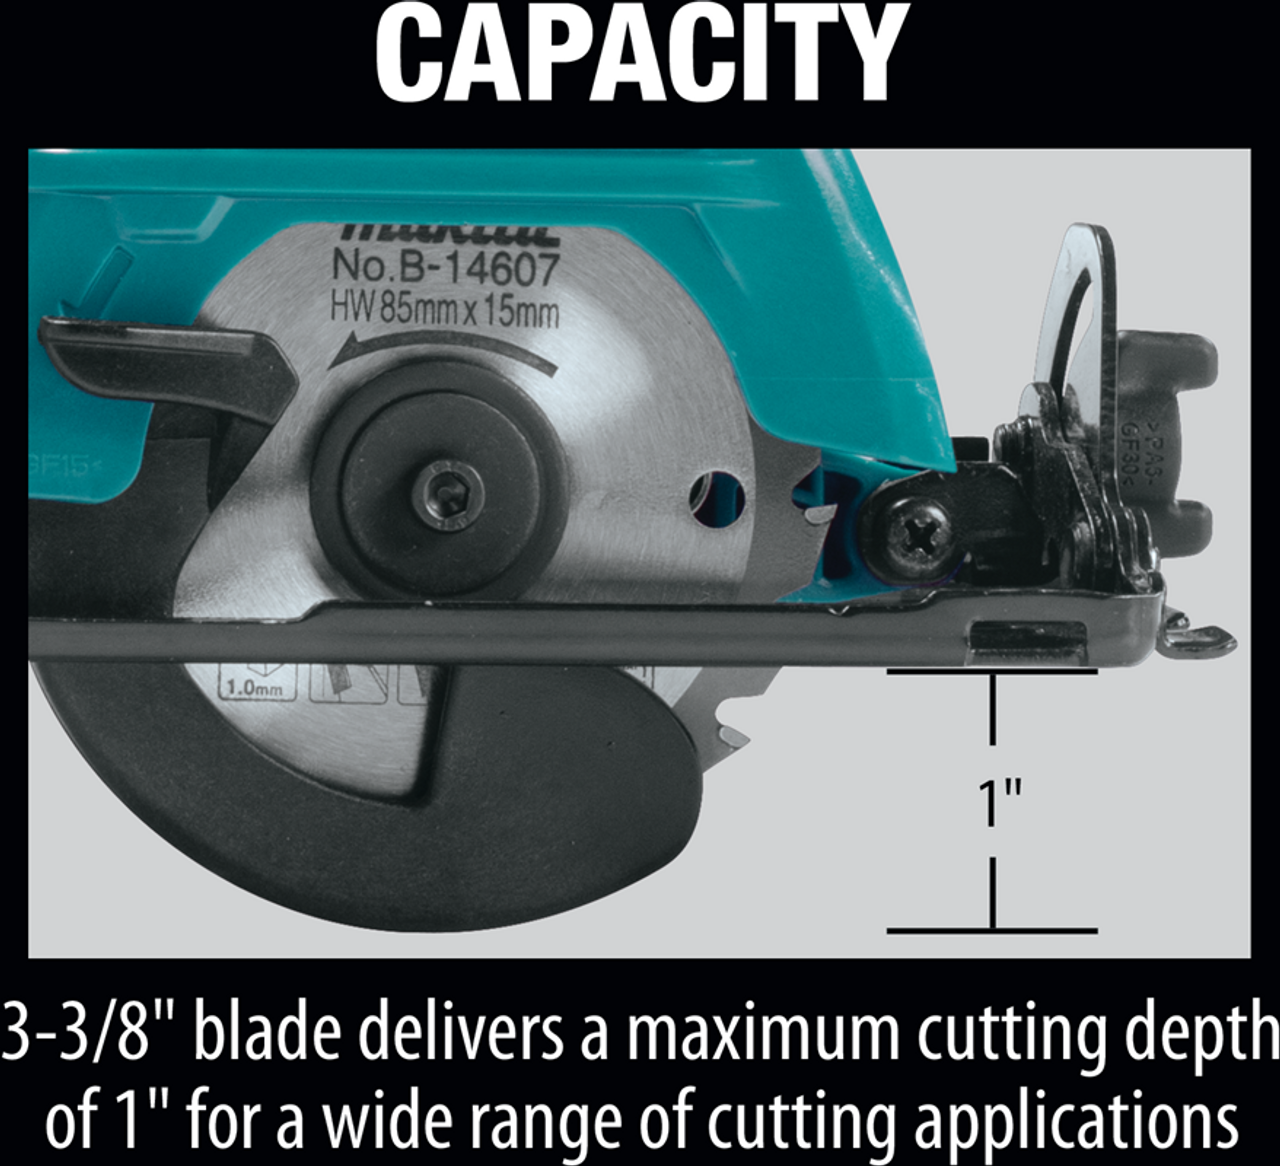 Makita LT02Z 12V max CXT Lithium-Ion Cordless 8" Angle Impact Wrench Tool Only - 1